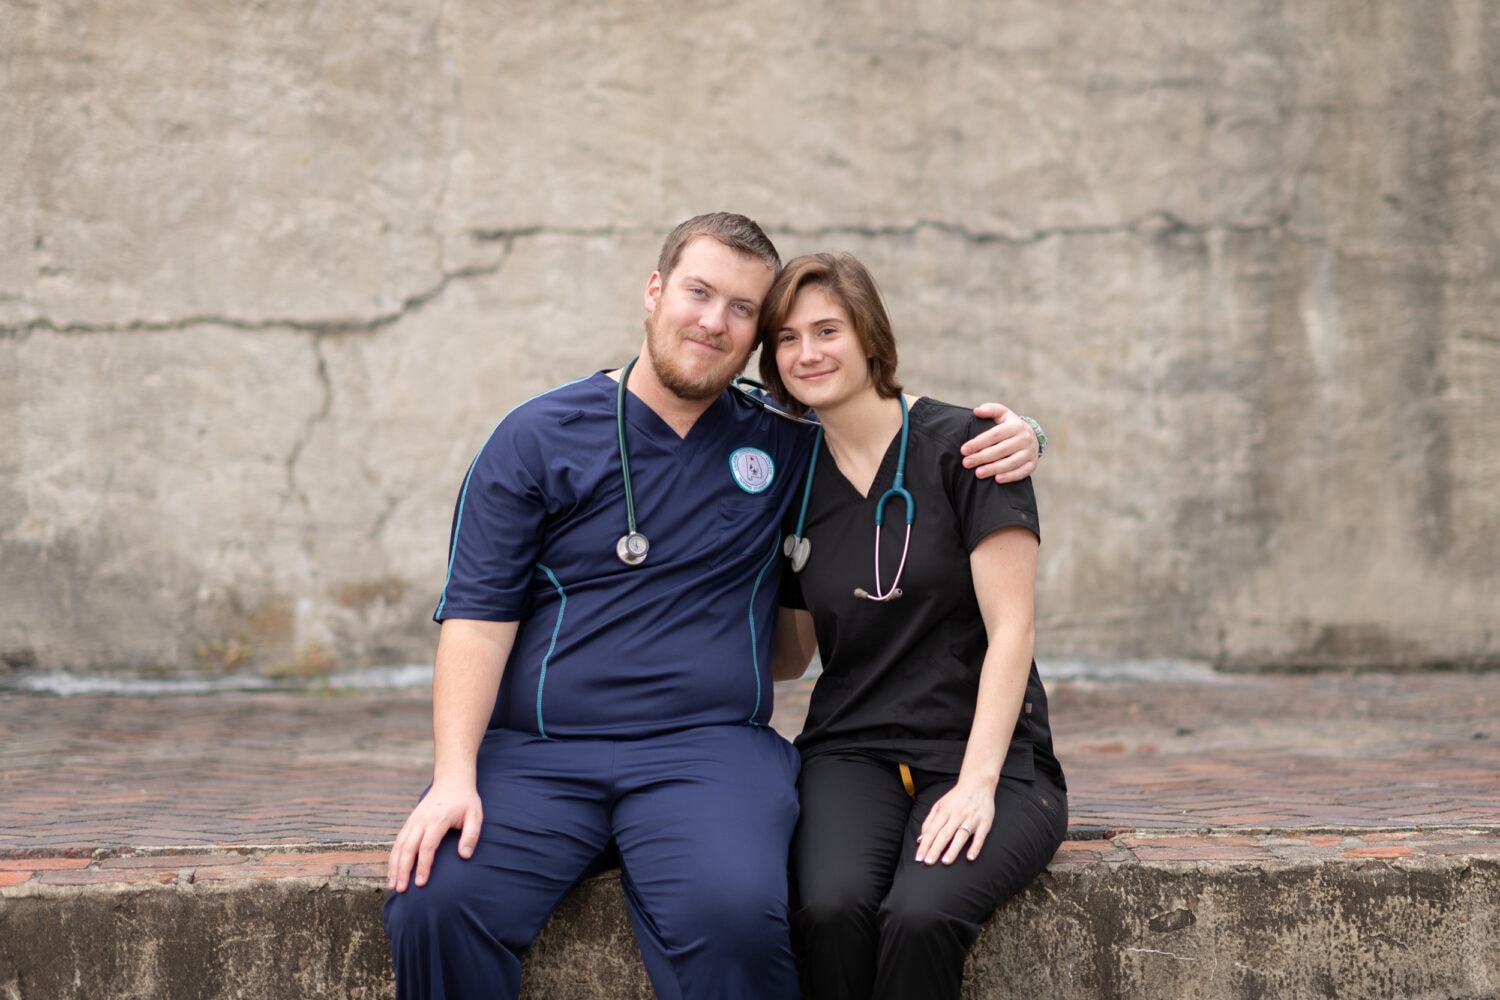 Engagement pictures in their nurse uniforms - Huntington Beach State Park